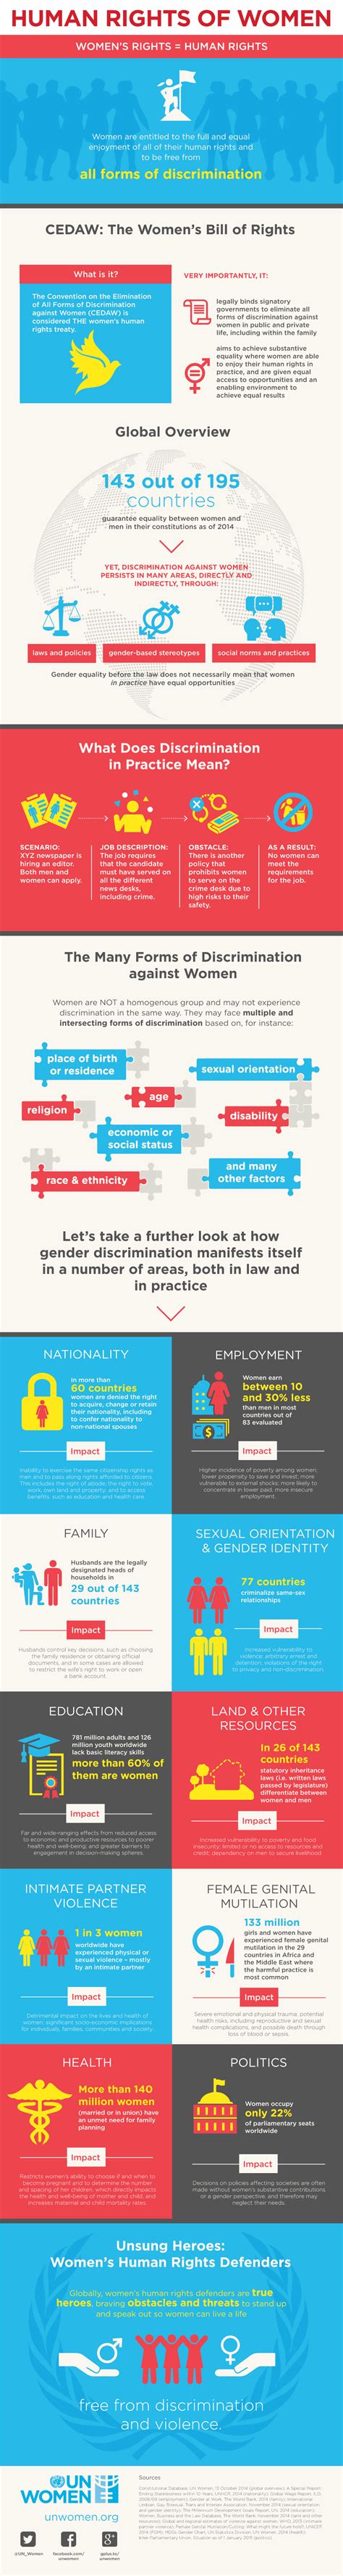 Infographic Human Rights Of Women Human Rights Infographic